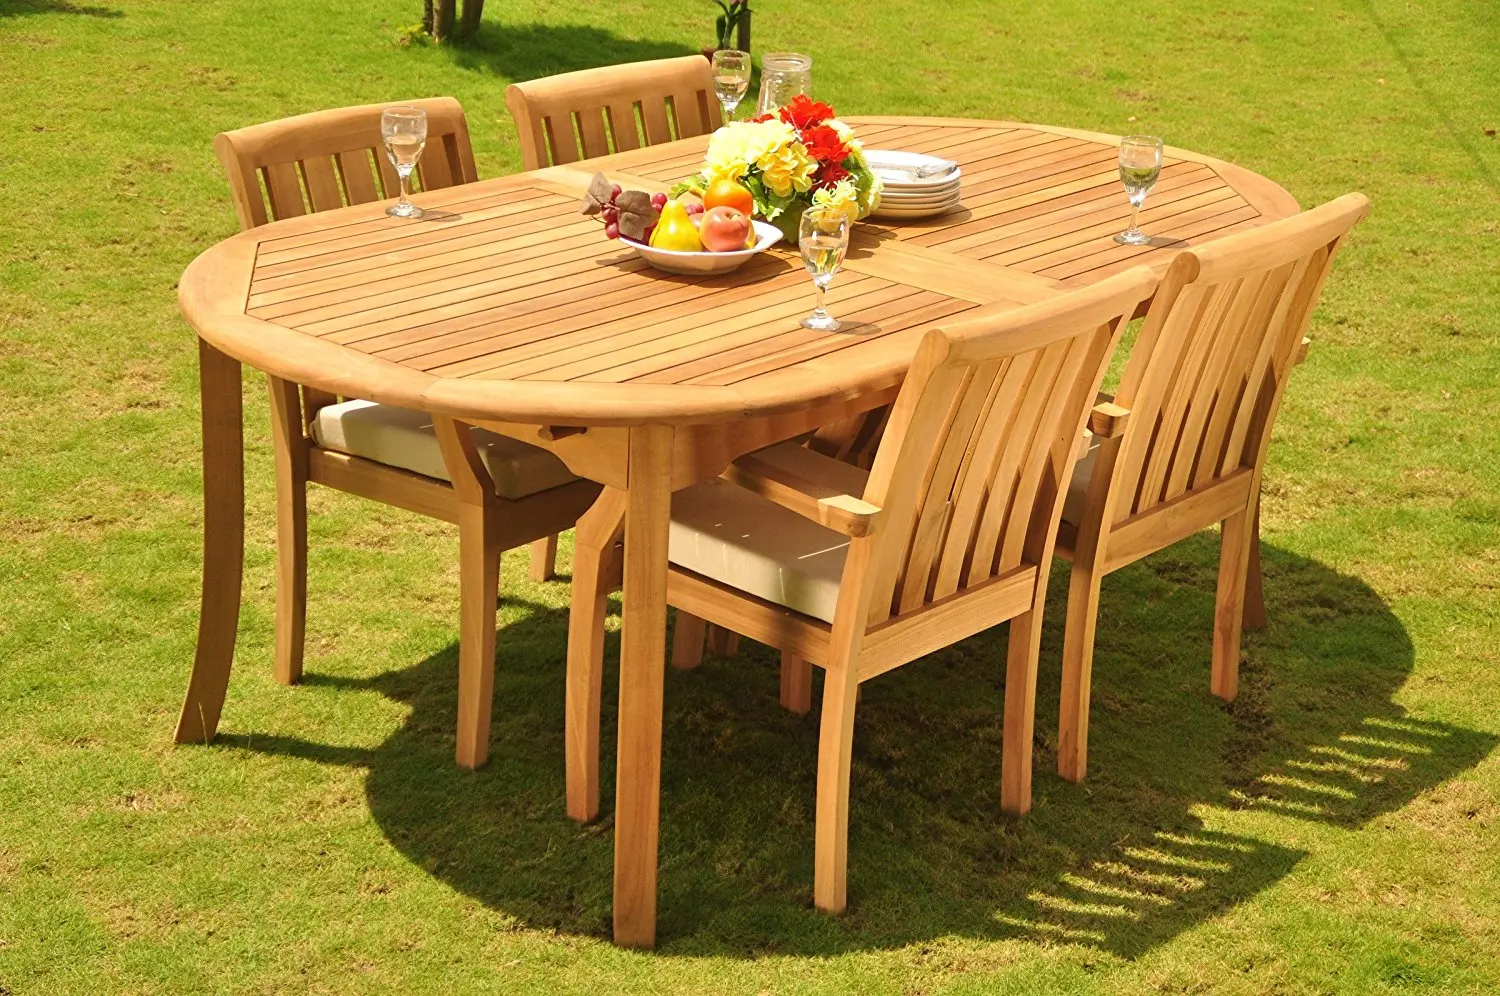 Buy Newgrade A Teak Wood Dining Set 4 Seater 5 Pc 117 Double Extensions Oval Dining Table And 4 Somerset Stacking Arm Captain Chairs Wfdsss4 In Cheap Price On Alibaba Com